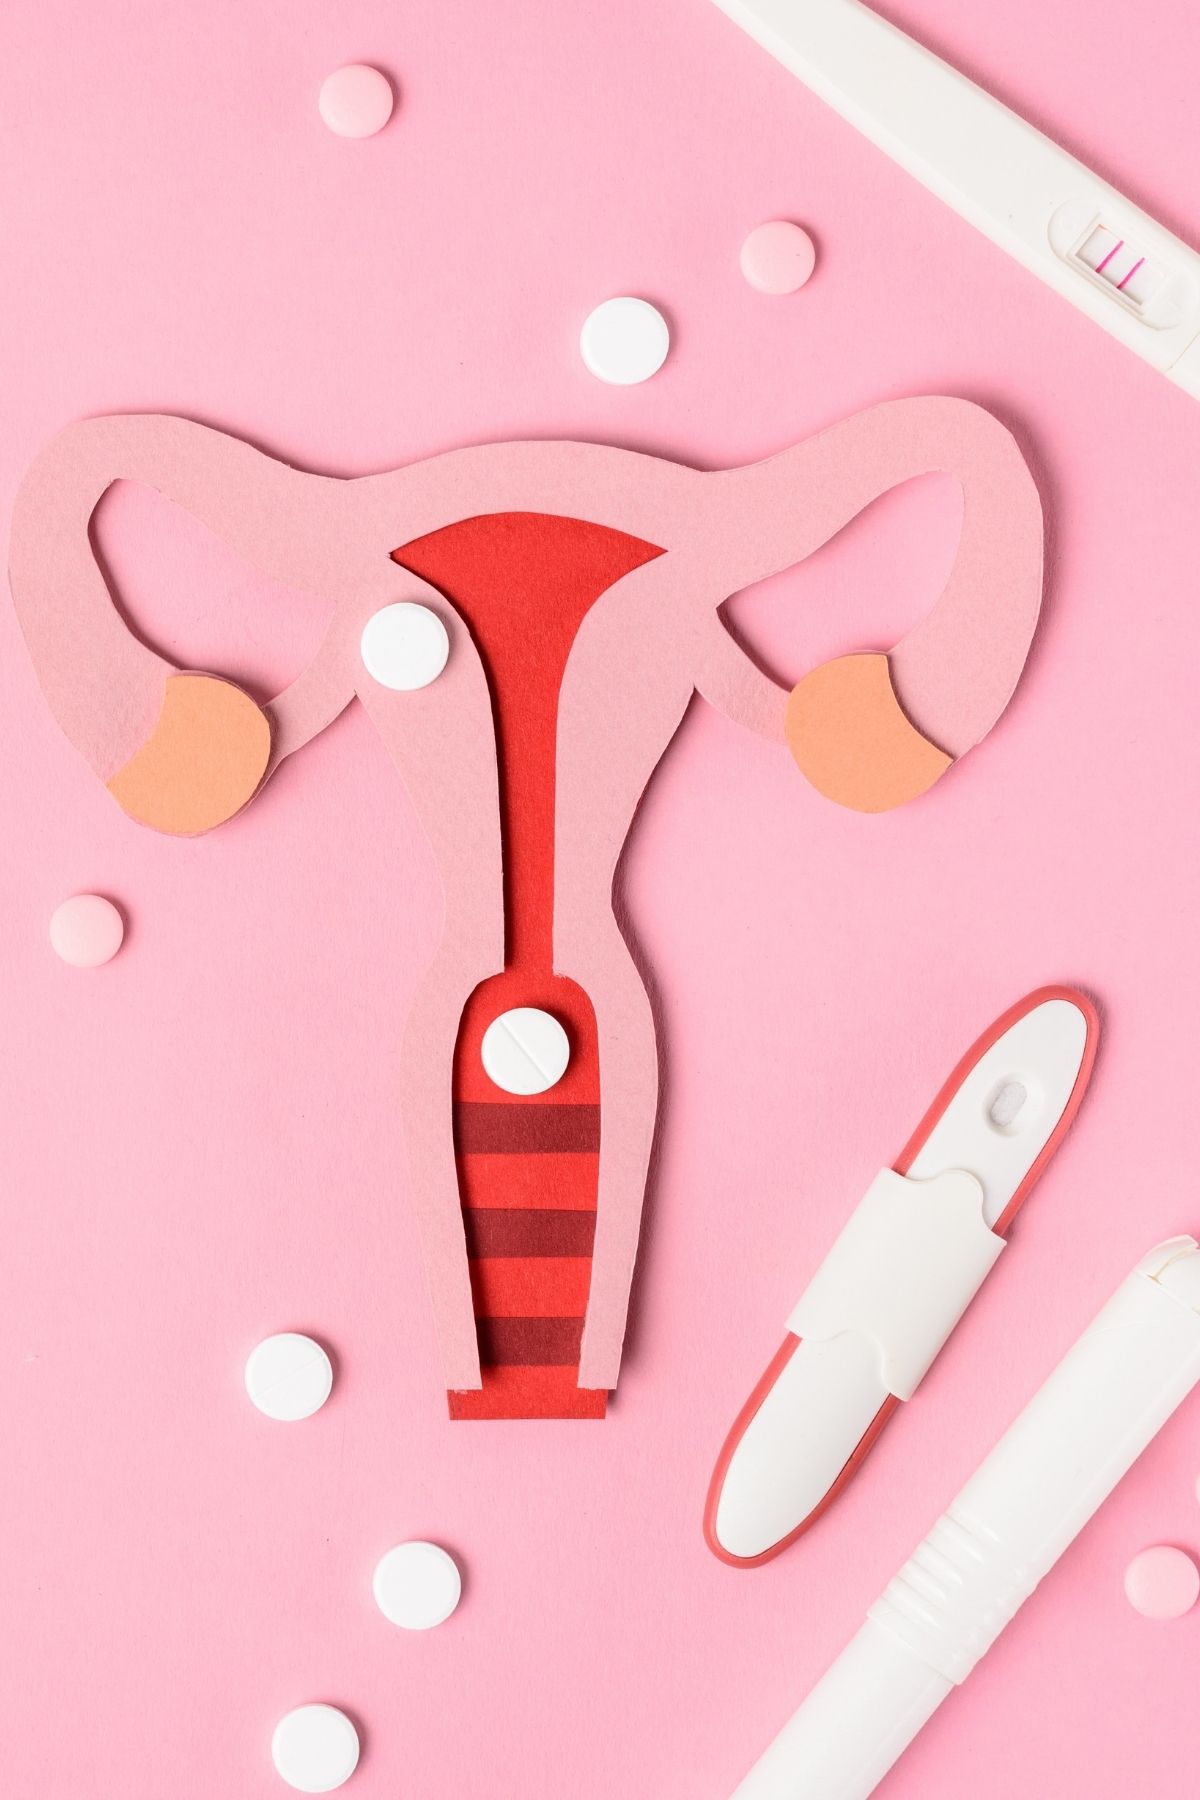 Paper diagram of uterus surrounded by white and pink pills and several pregnancy tests on pink background.